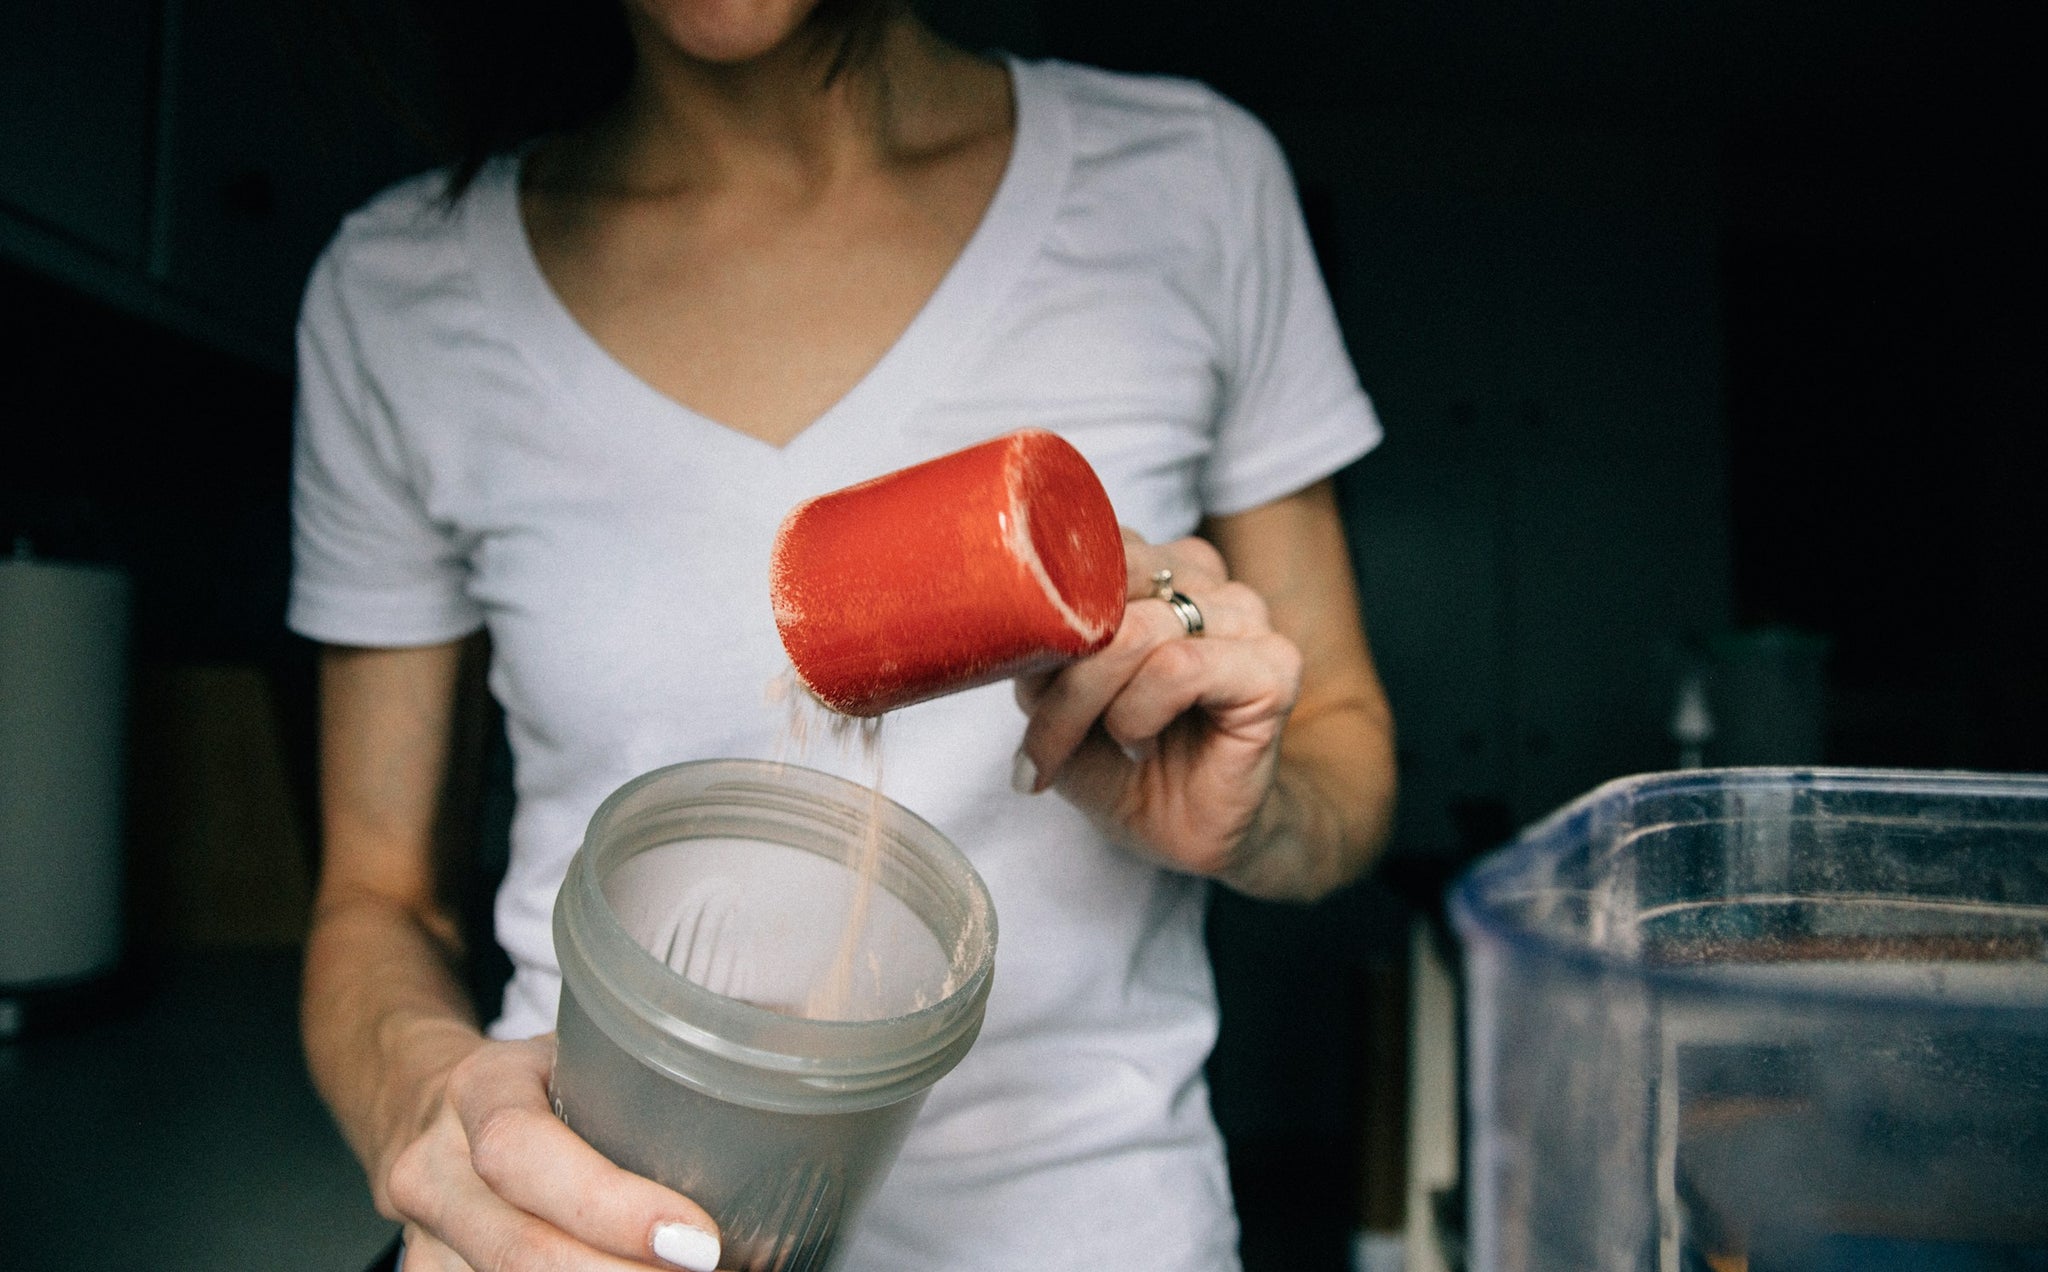 Woman scooping protein powder